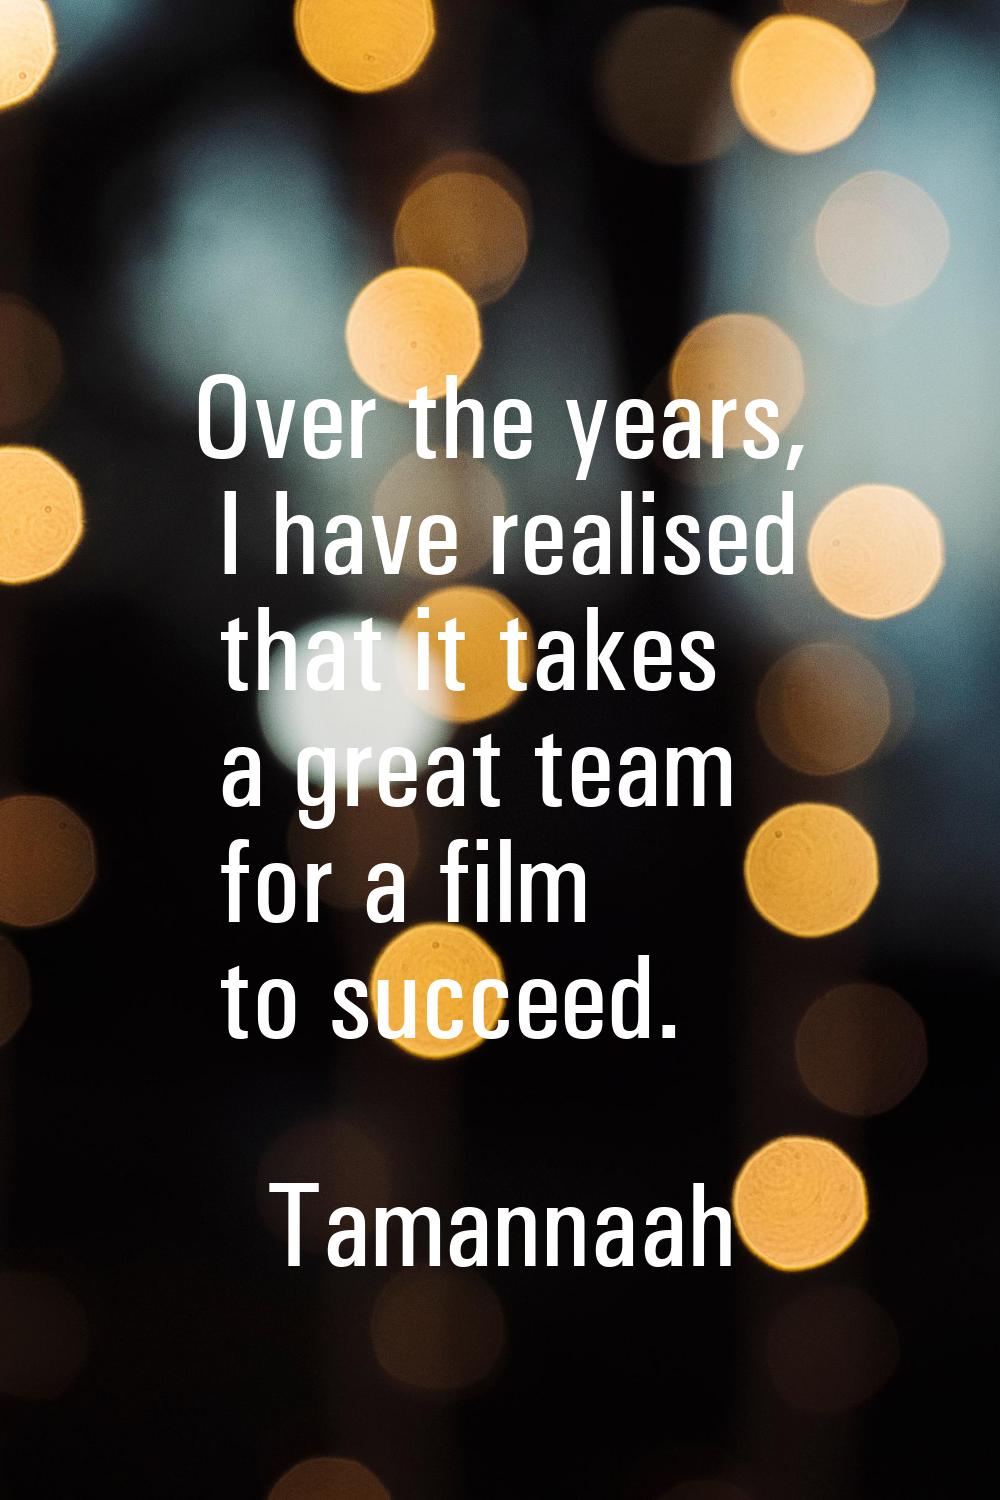 Over the years, I have realised that it takes a great team for a film to succeed.